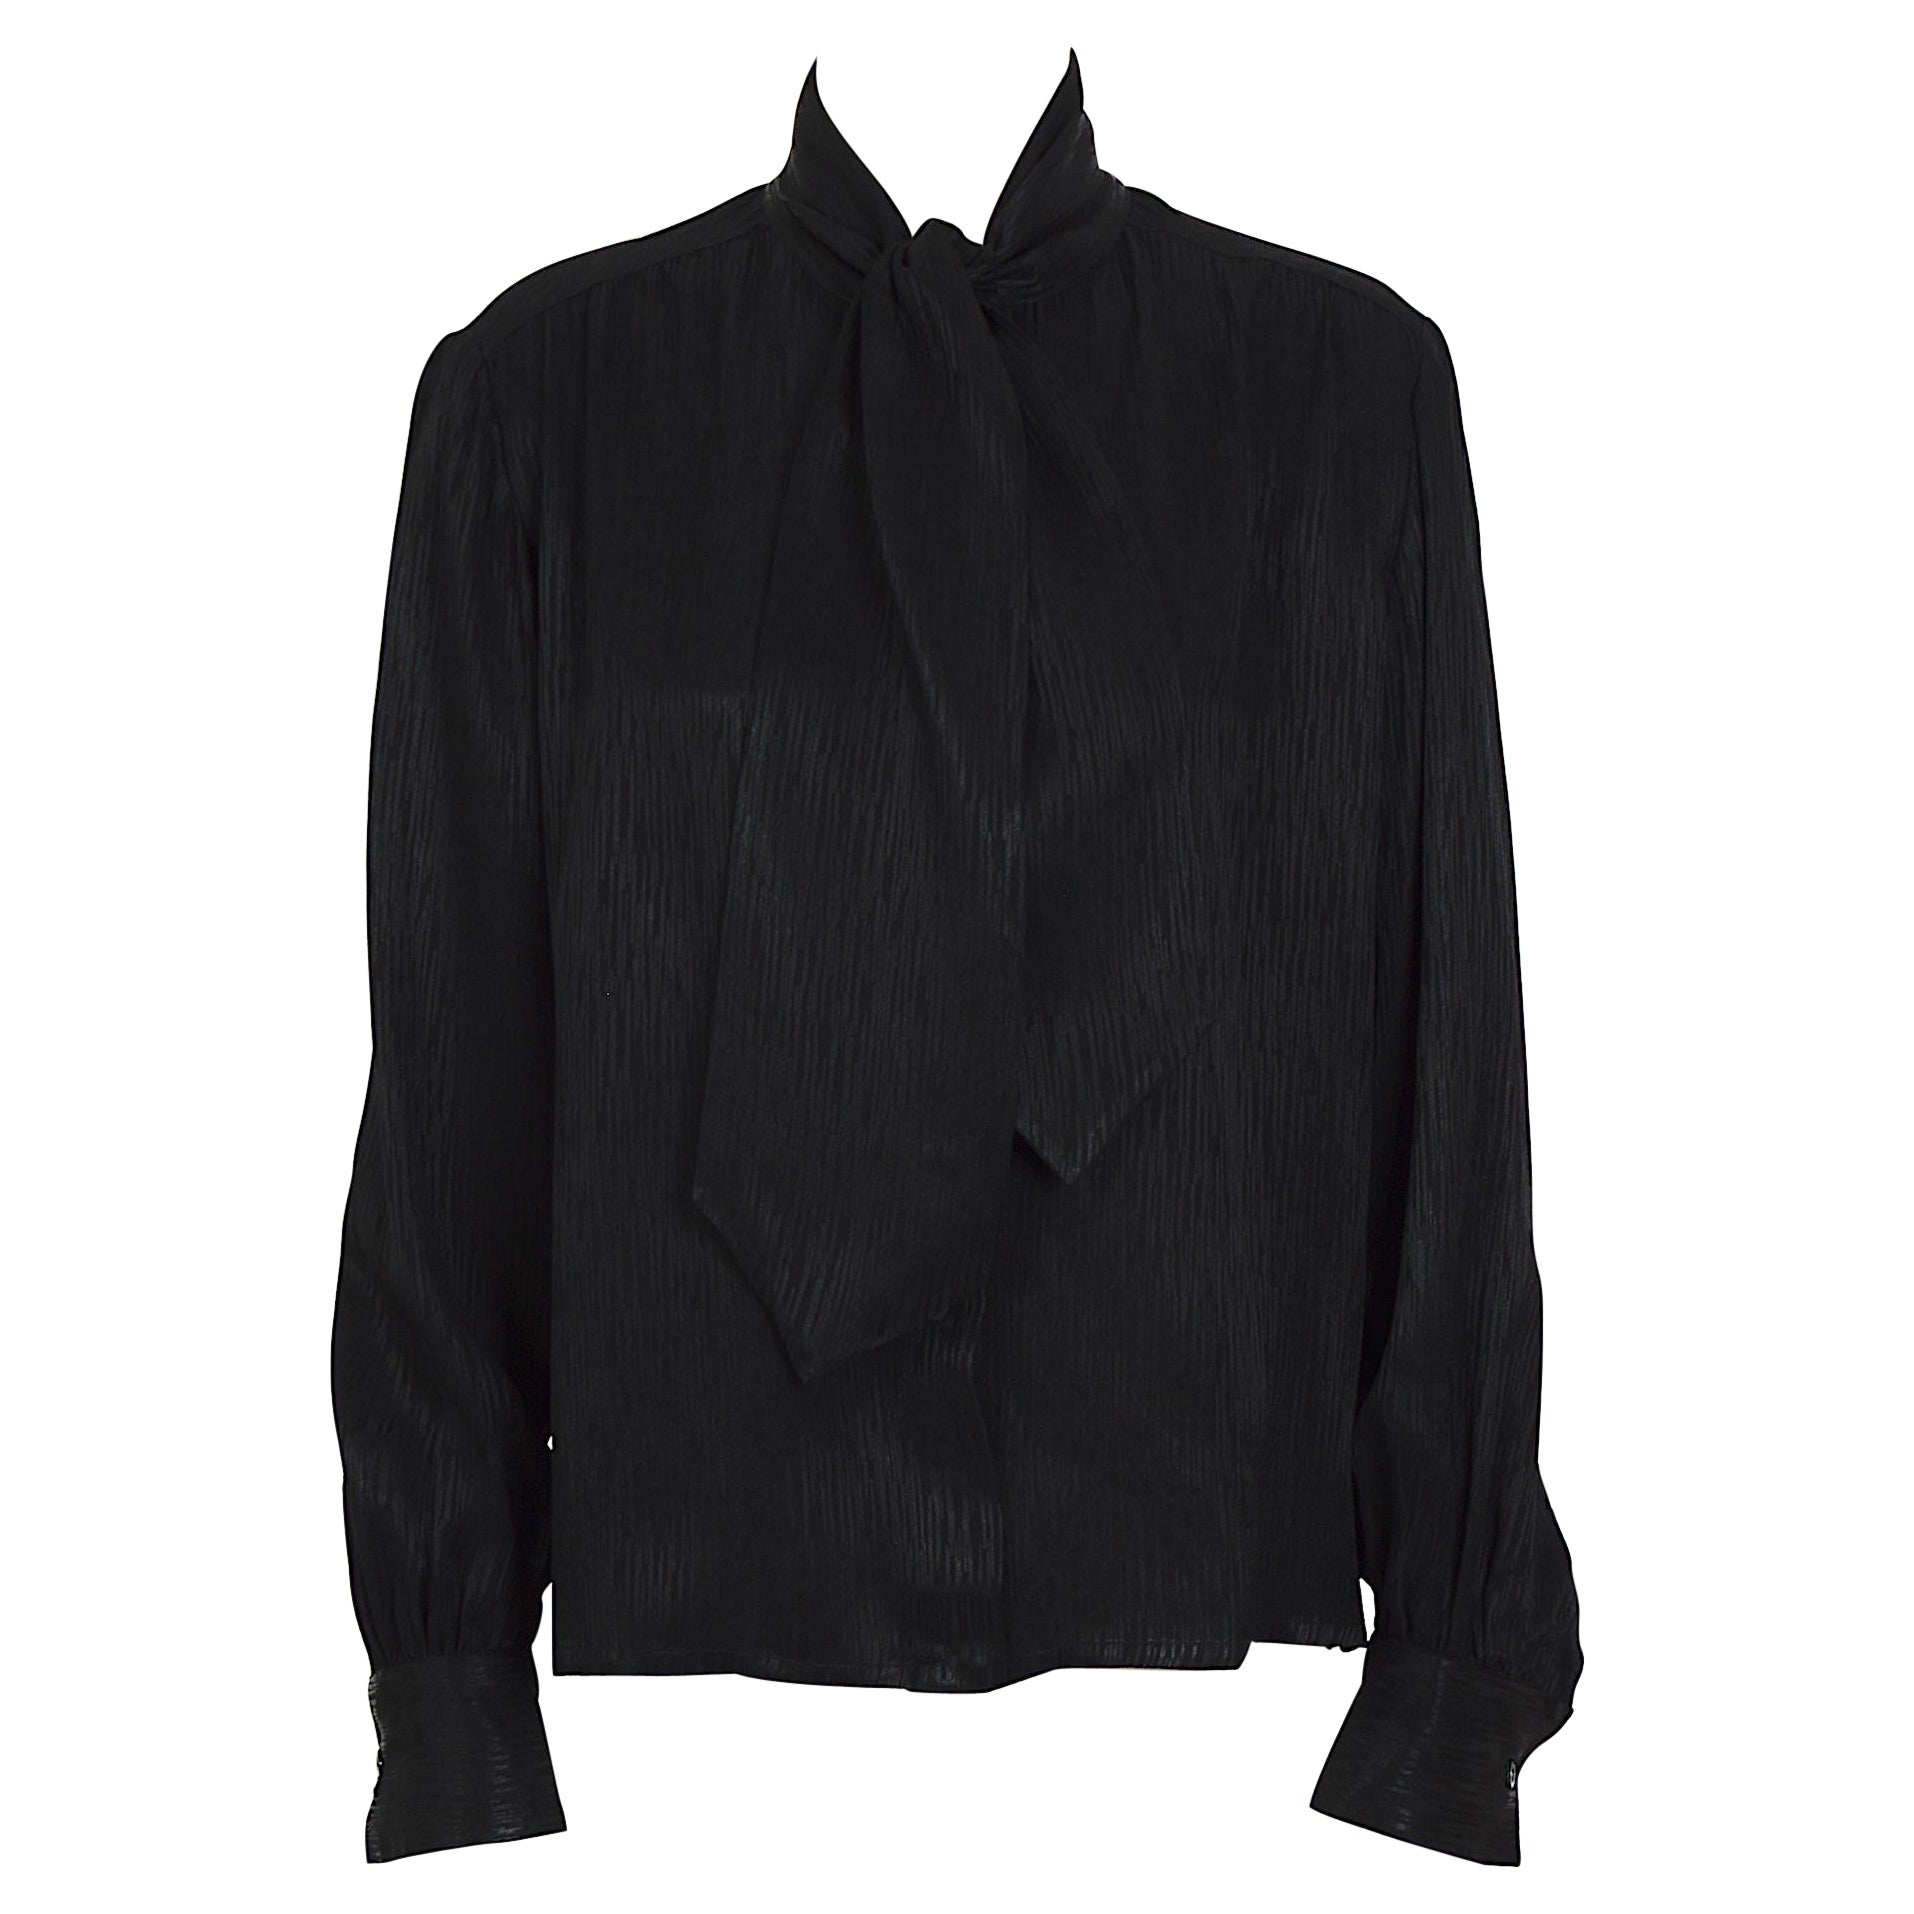 Rare Vintage Yves Saint Laurent Black Ruffle Blouse From " Russian